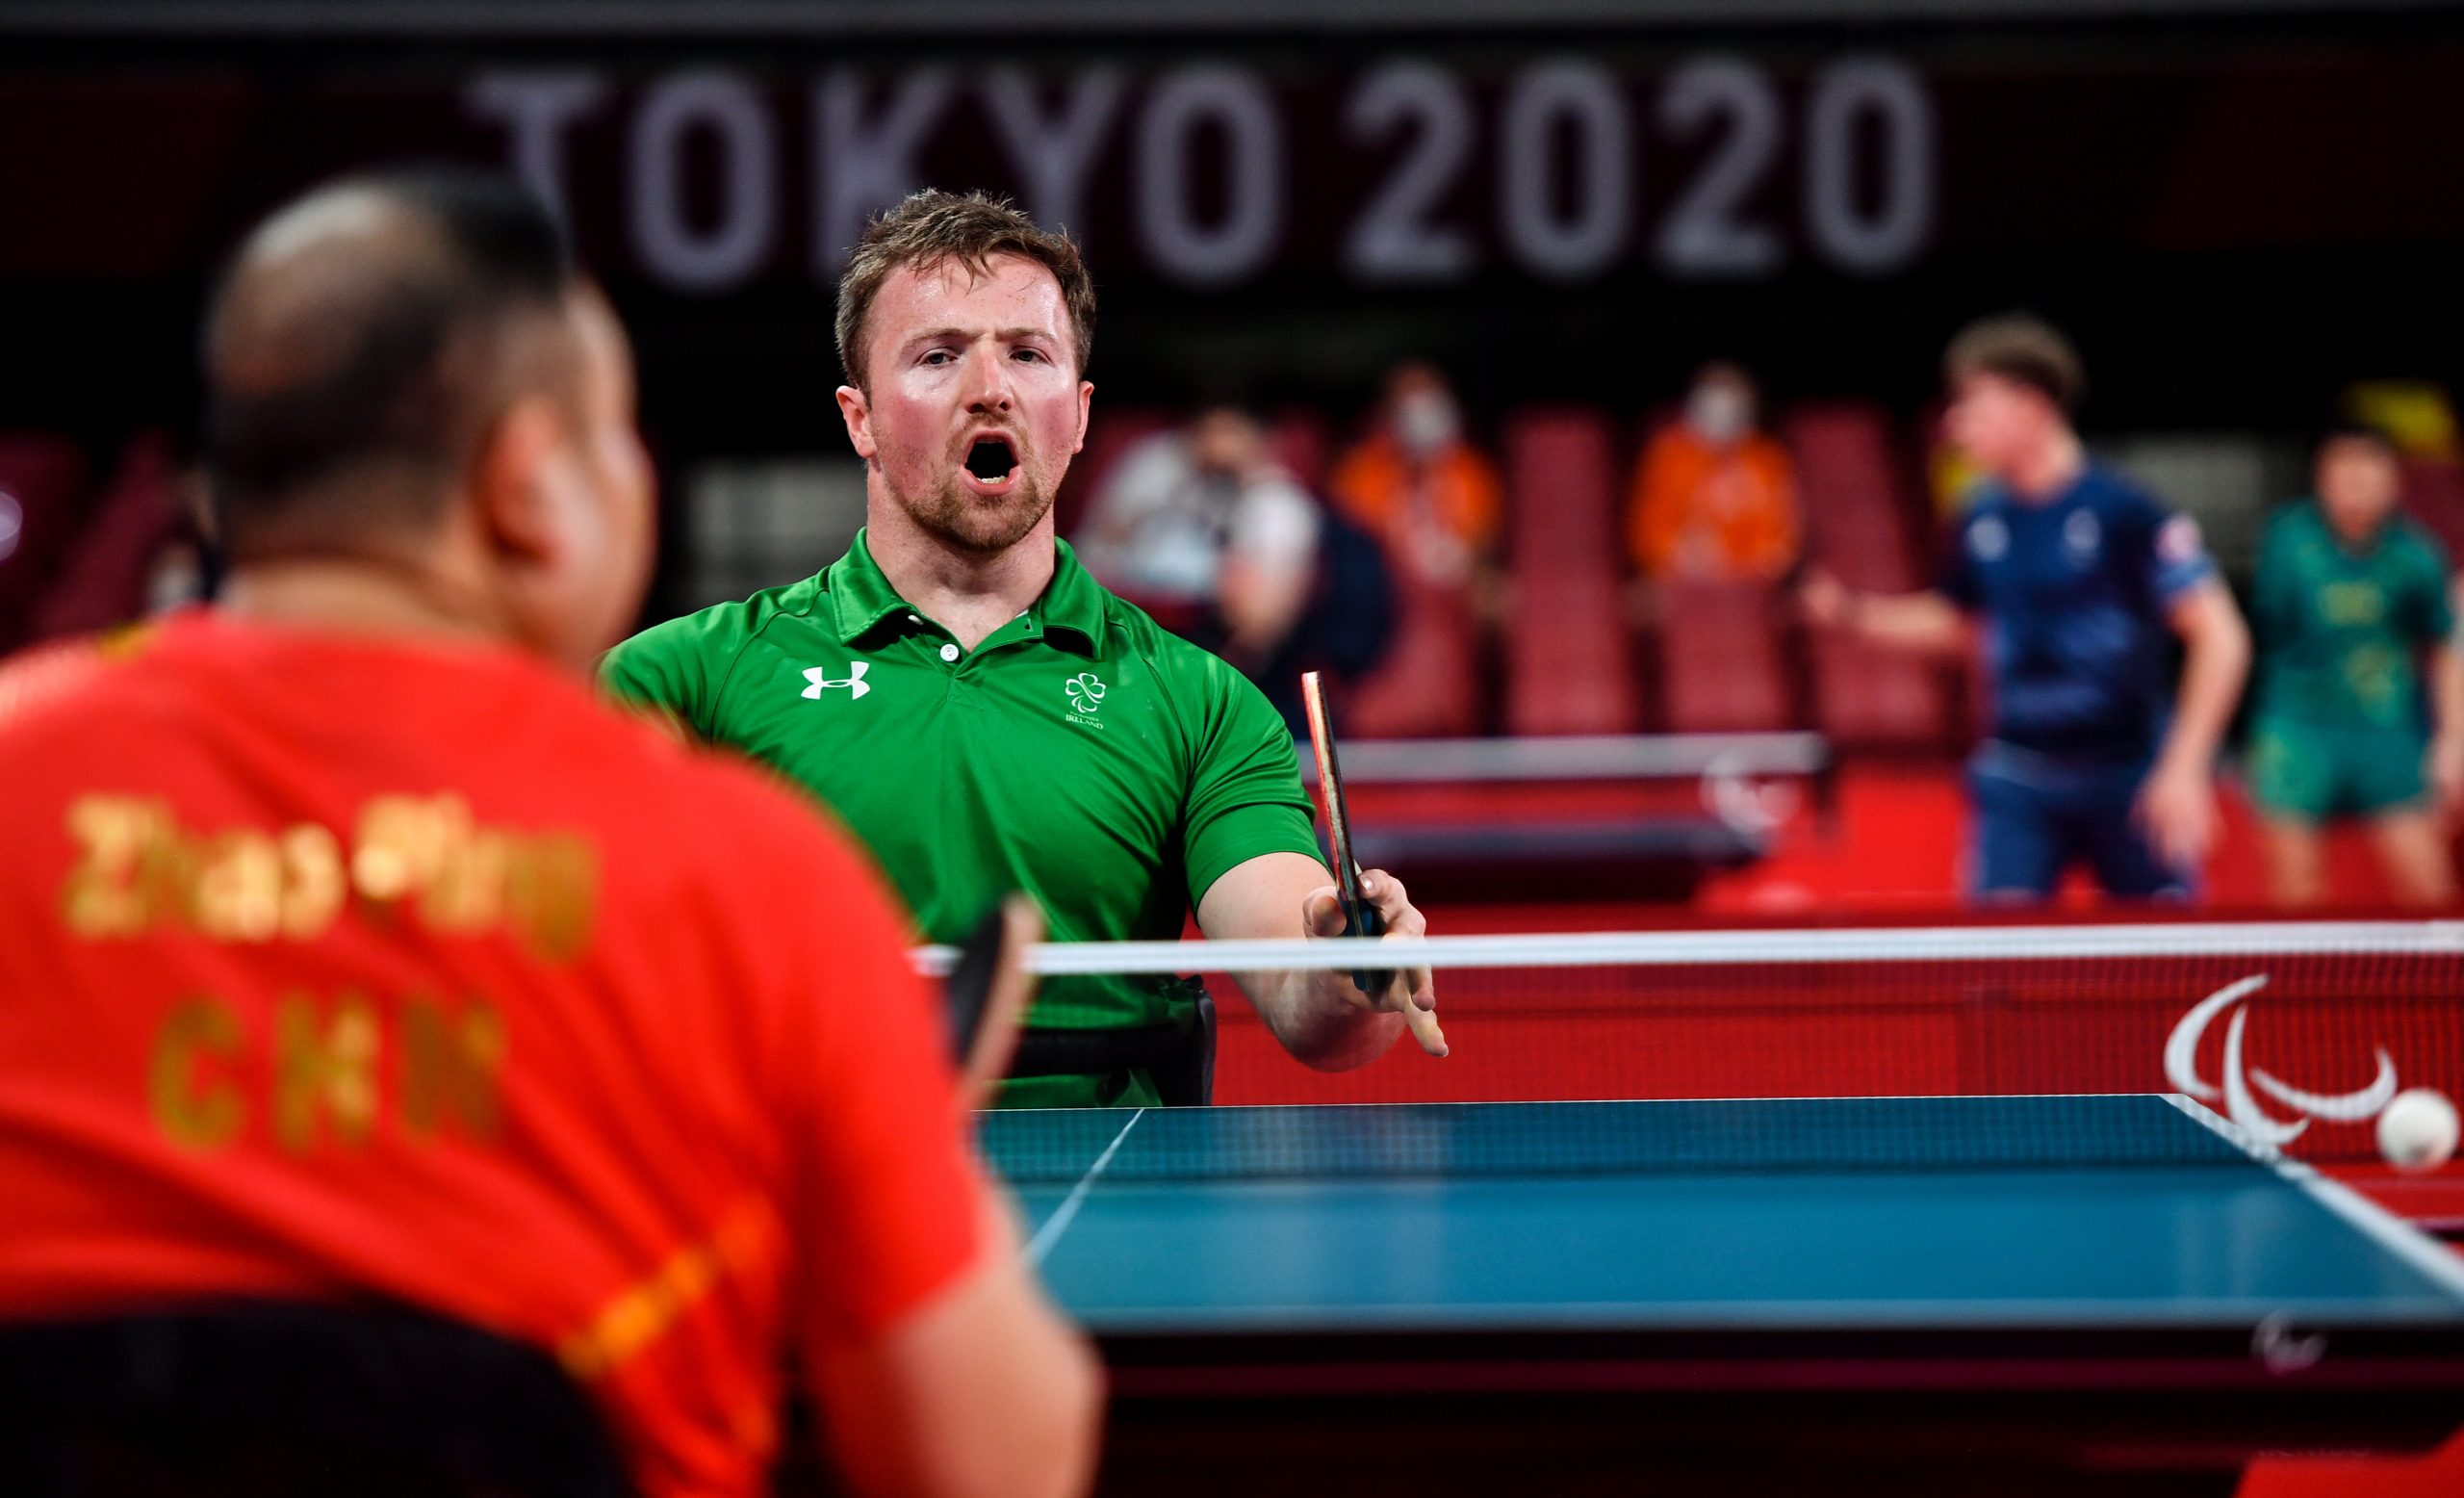 25 August 2021; Colin Judge of Ireland celebrated winning a point whilst competing in his C3 Men's Singles Table Tennis Qualifying Group G match against Ping Zhao of China at the Tokyo Metropolitan Gymnasium on day one during the Tokyo 2020 Paralympic Games in Tokyo, Japan. Photo by Sam Barnes/Sportsfile *** NO REPRODUCTION FEE ***